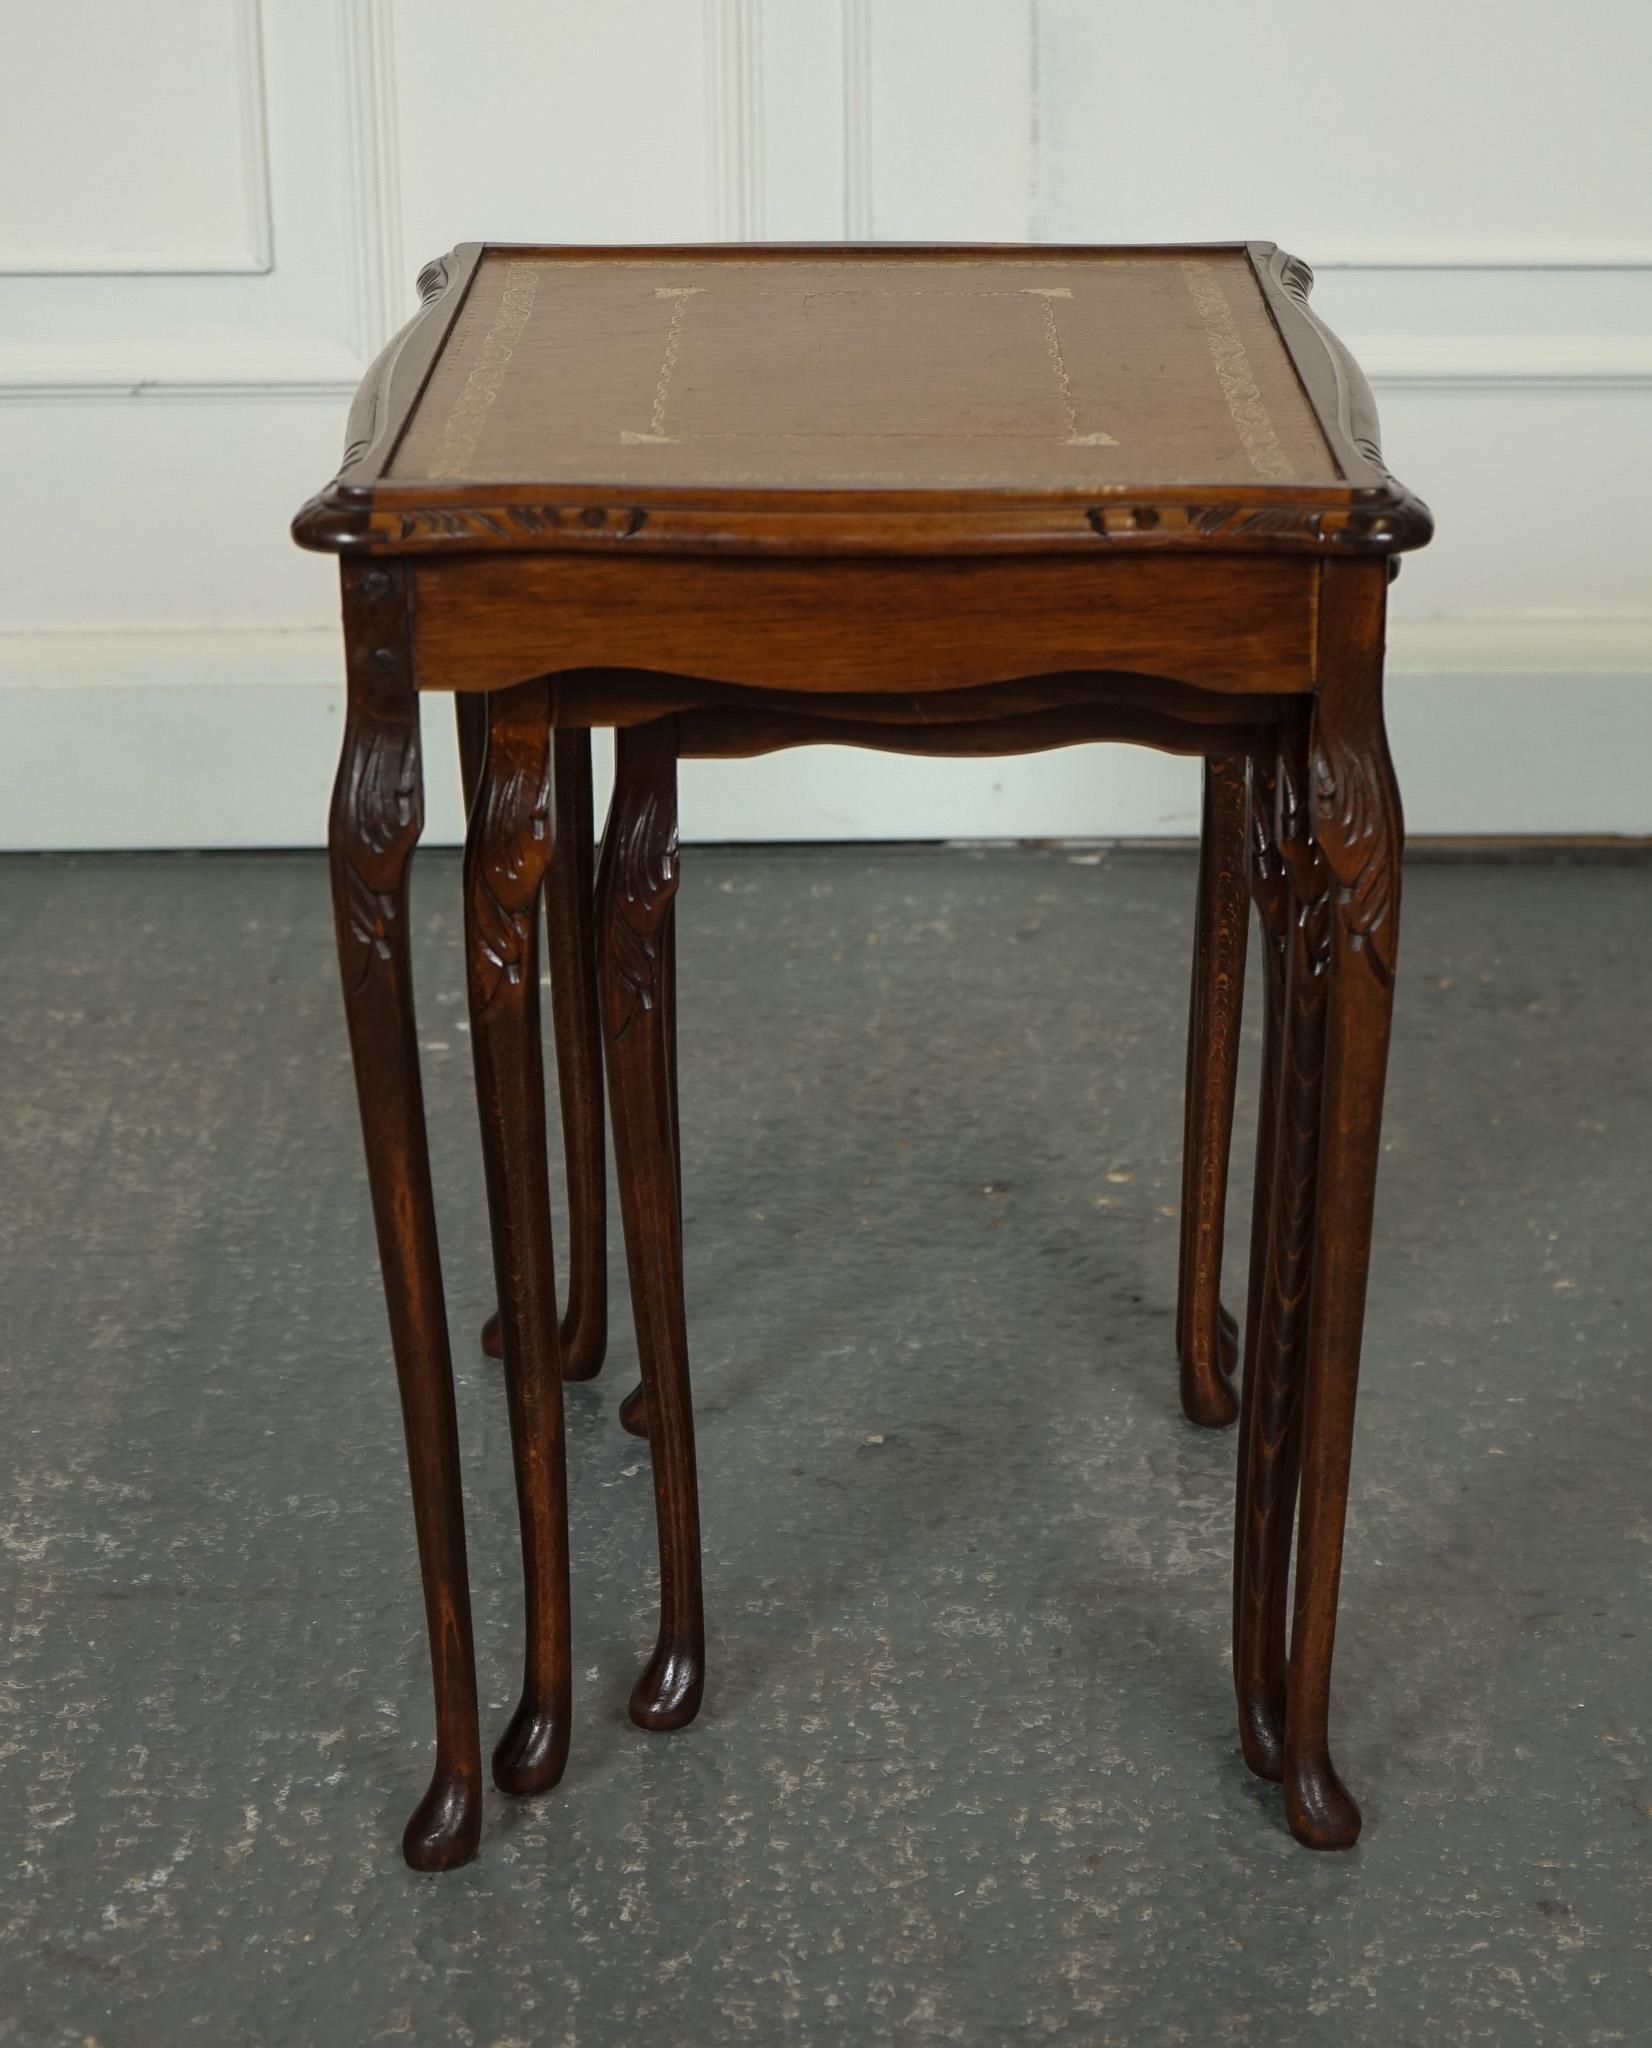 Leather VINTAGE NEST OF TABLES QUEEN ANNE STYLE LEGS WiTH BROWN EMBOSSED LEATHER TOP J1 For Sale